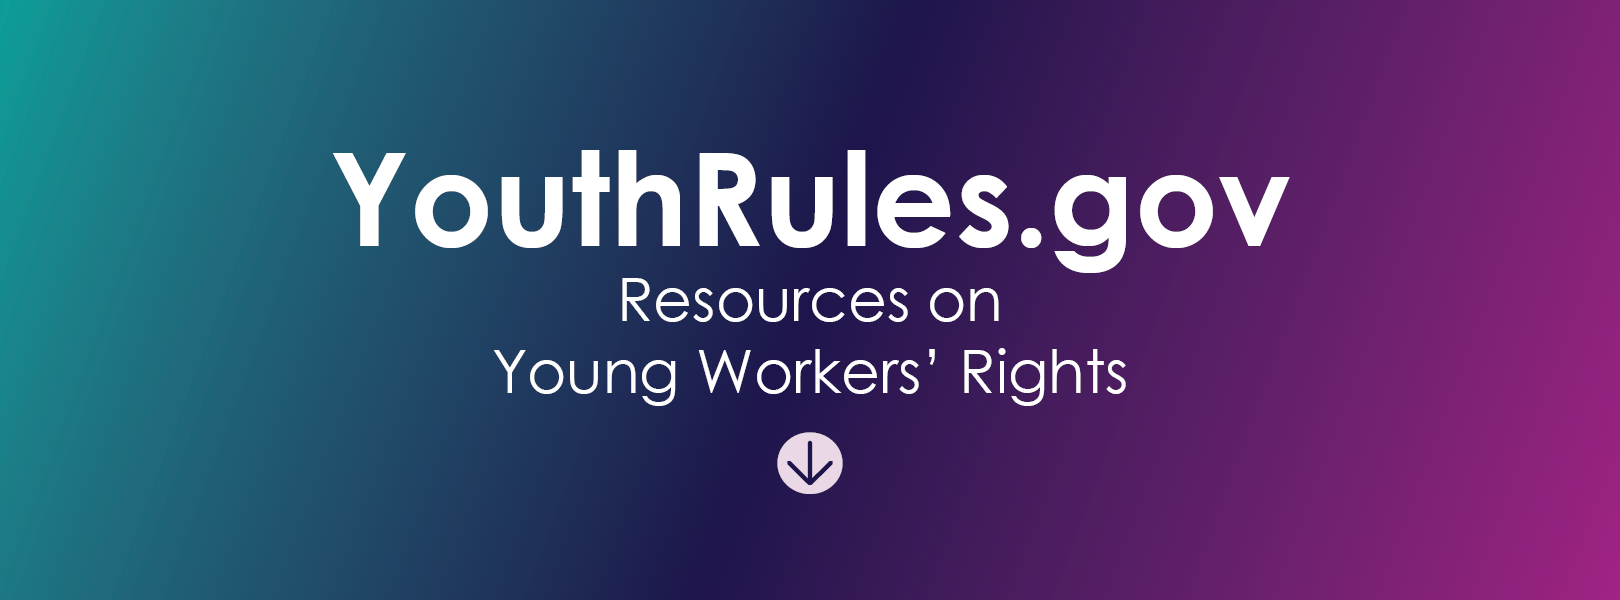 Youthrules.gov - Resources on Young Workers' Rights